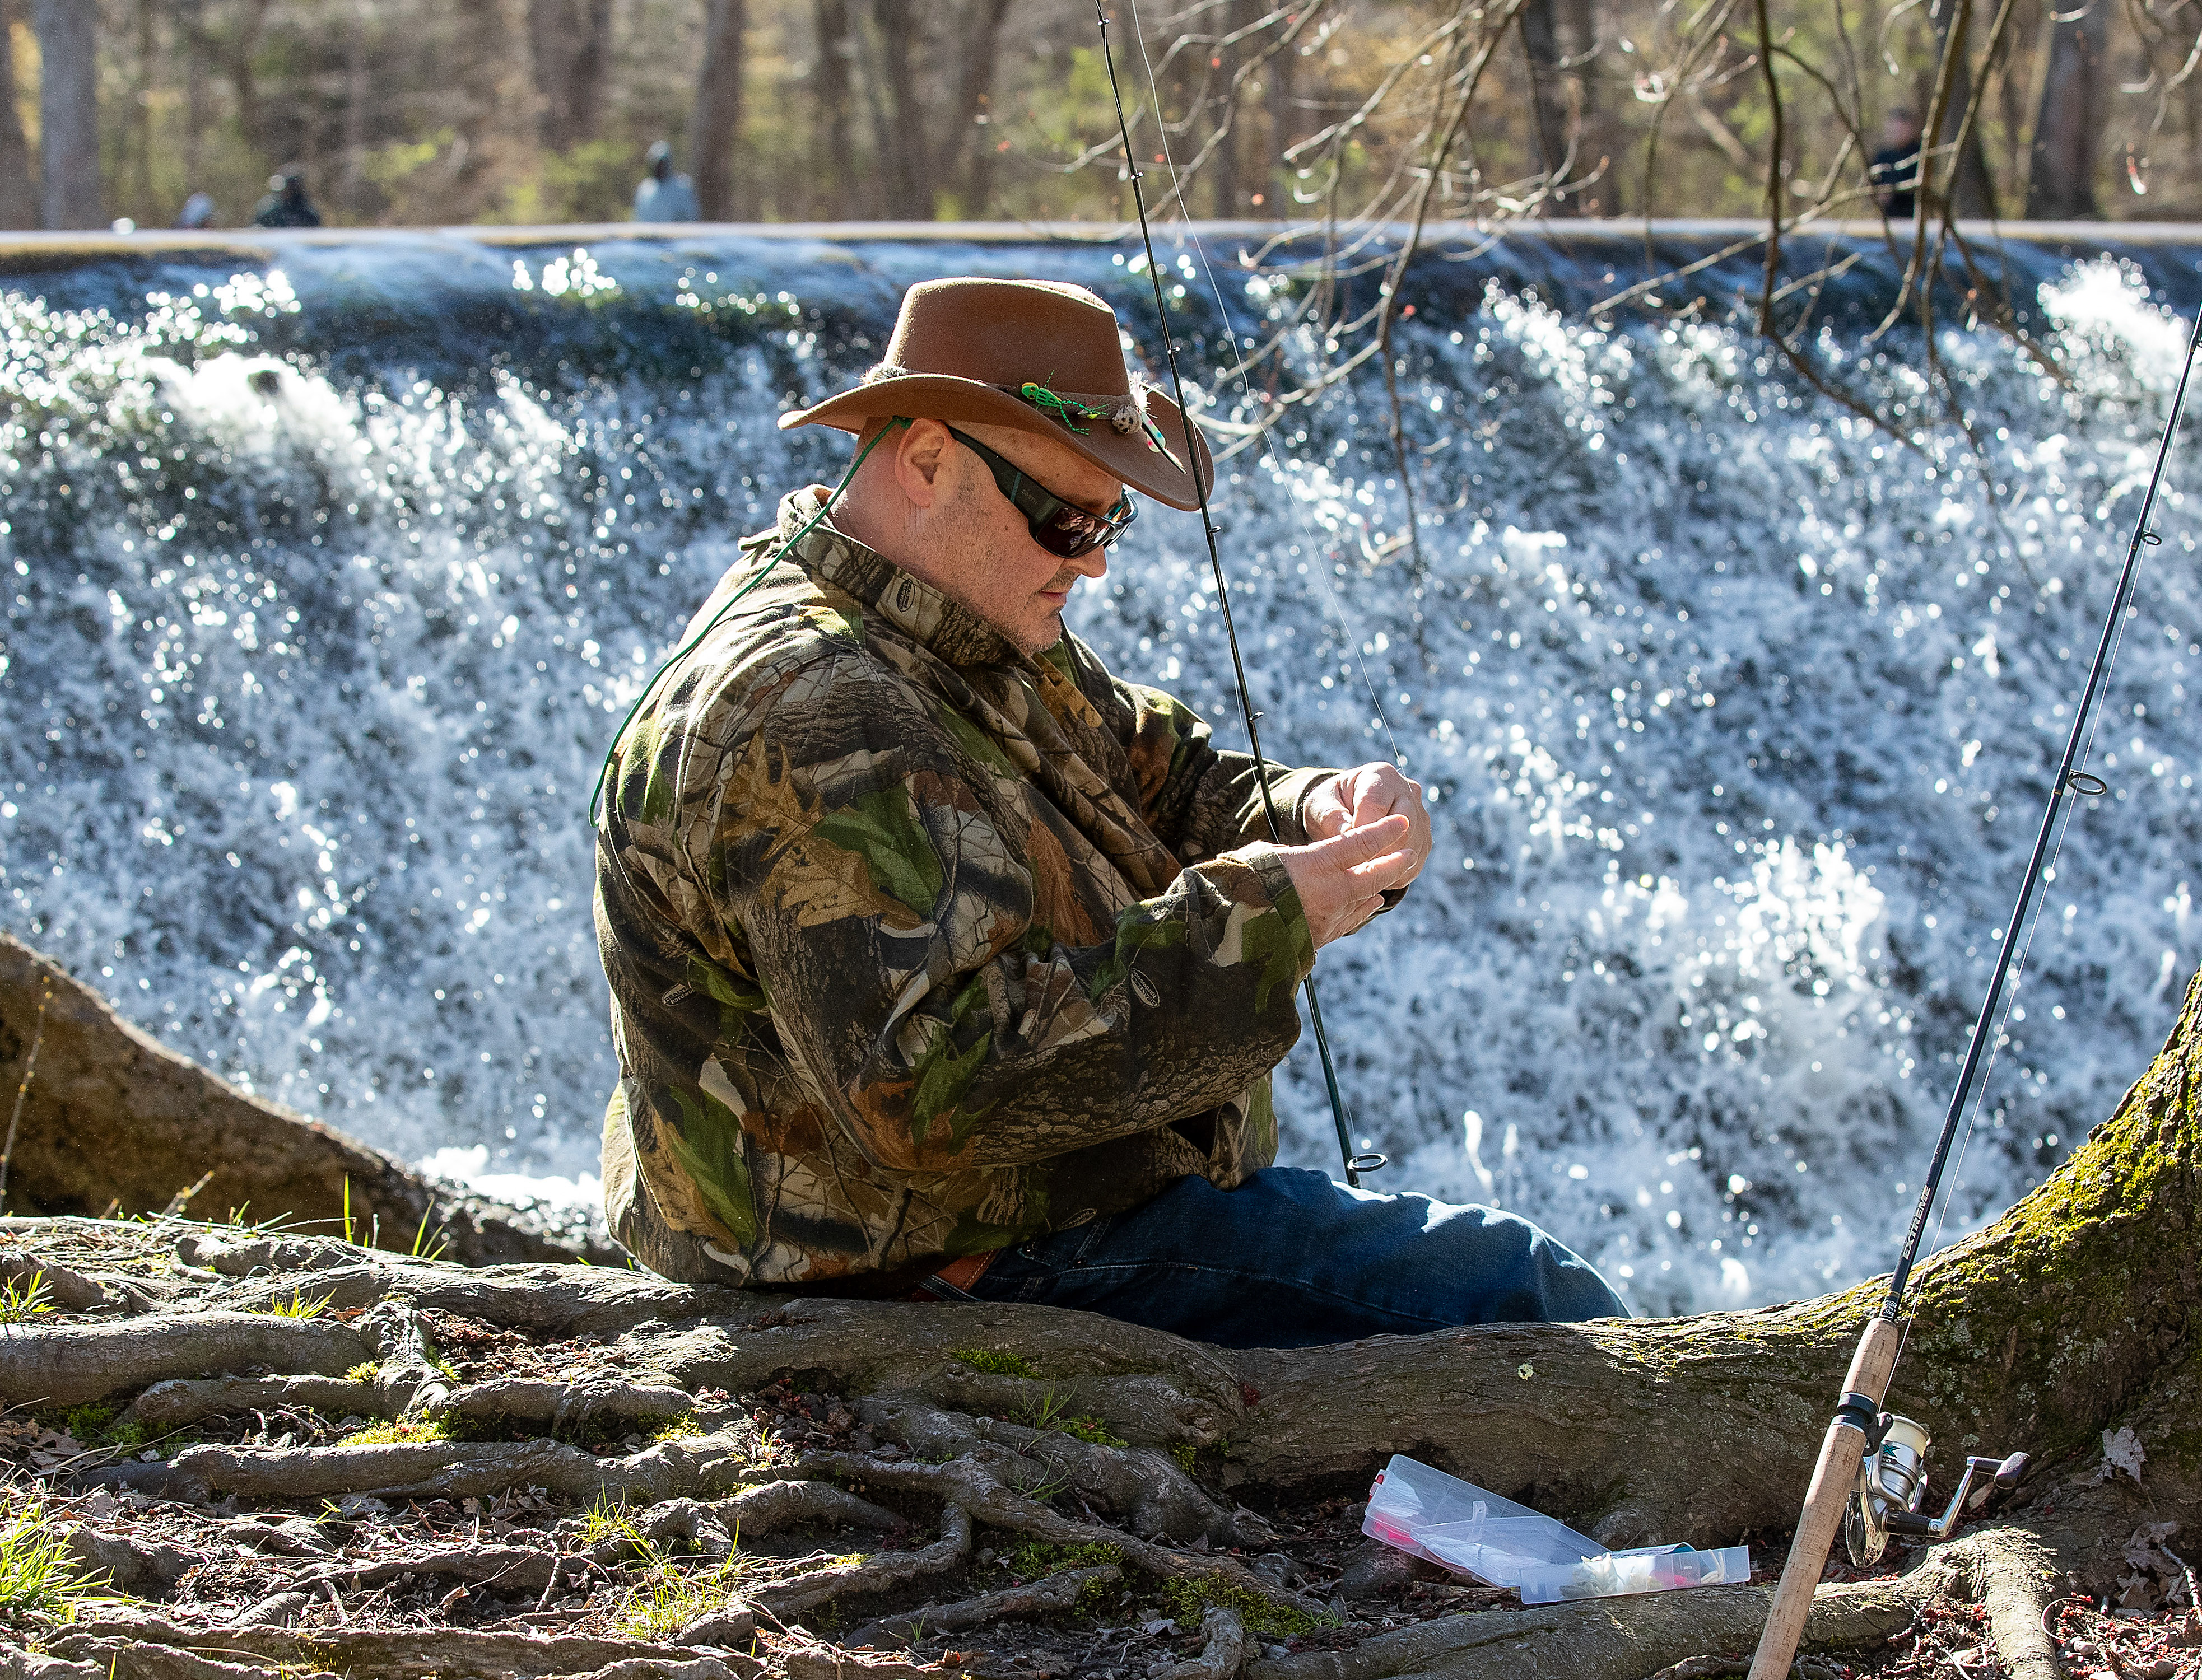 Pennsylvania fishing license fees may go higher - Outdoor News